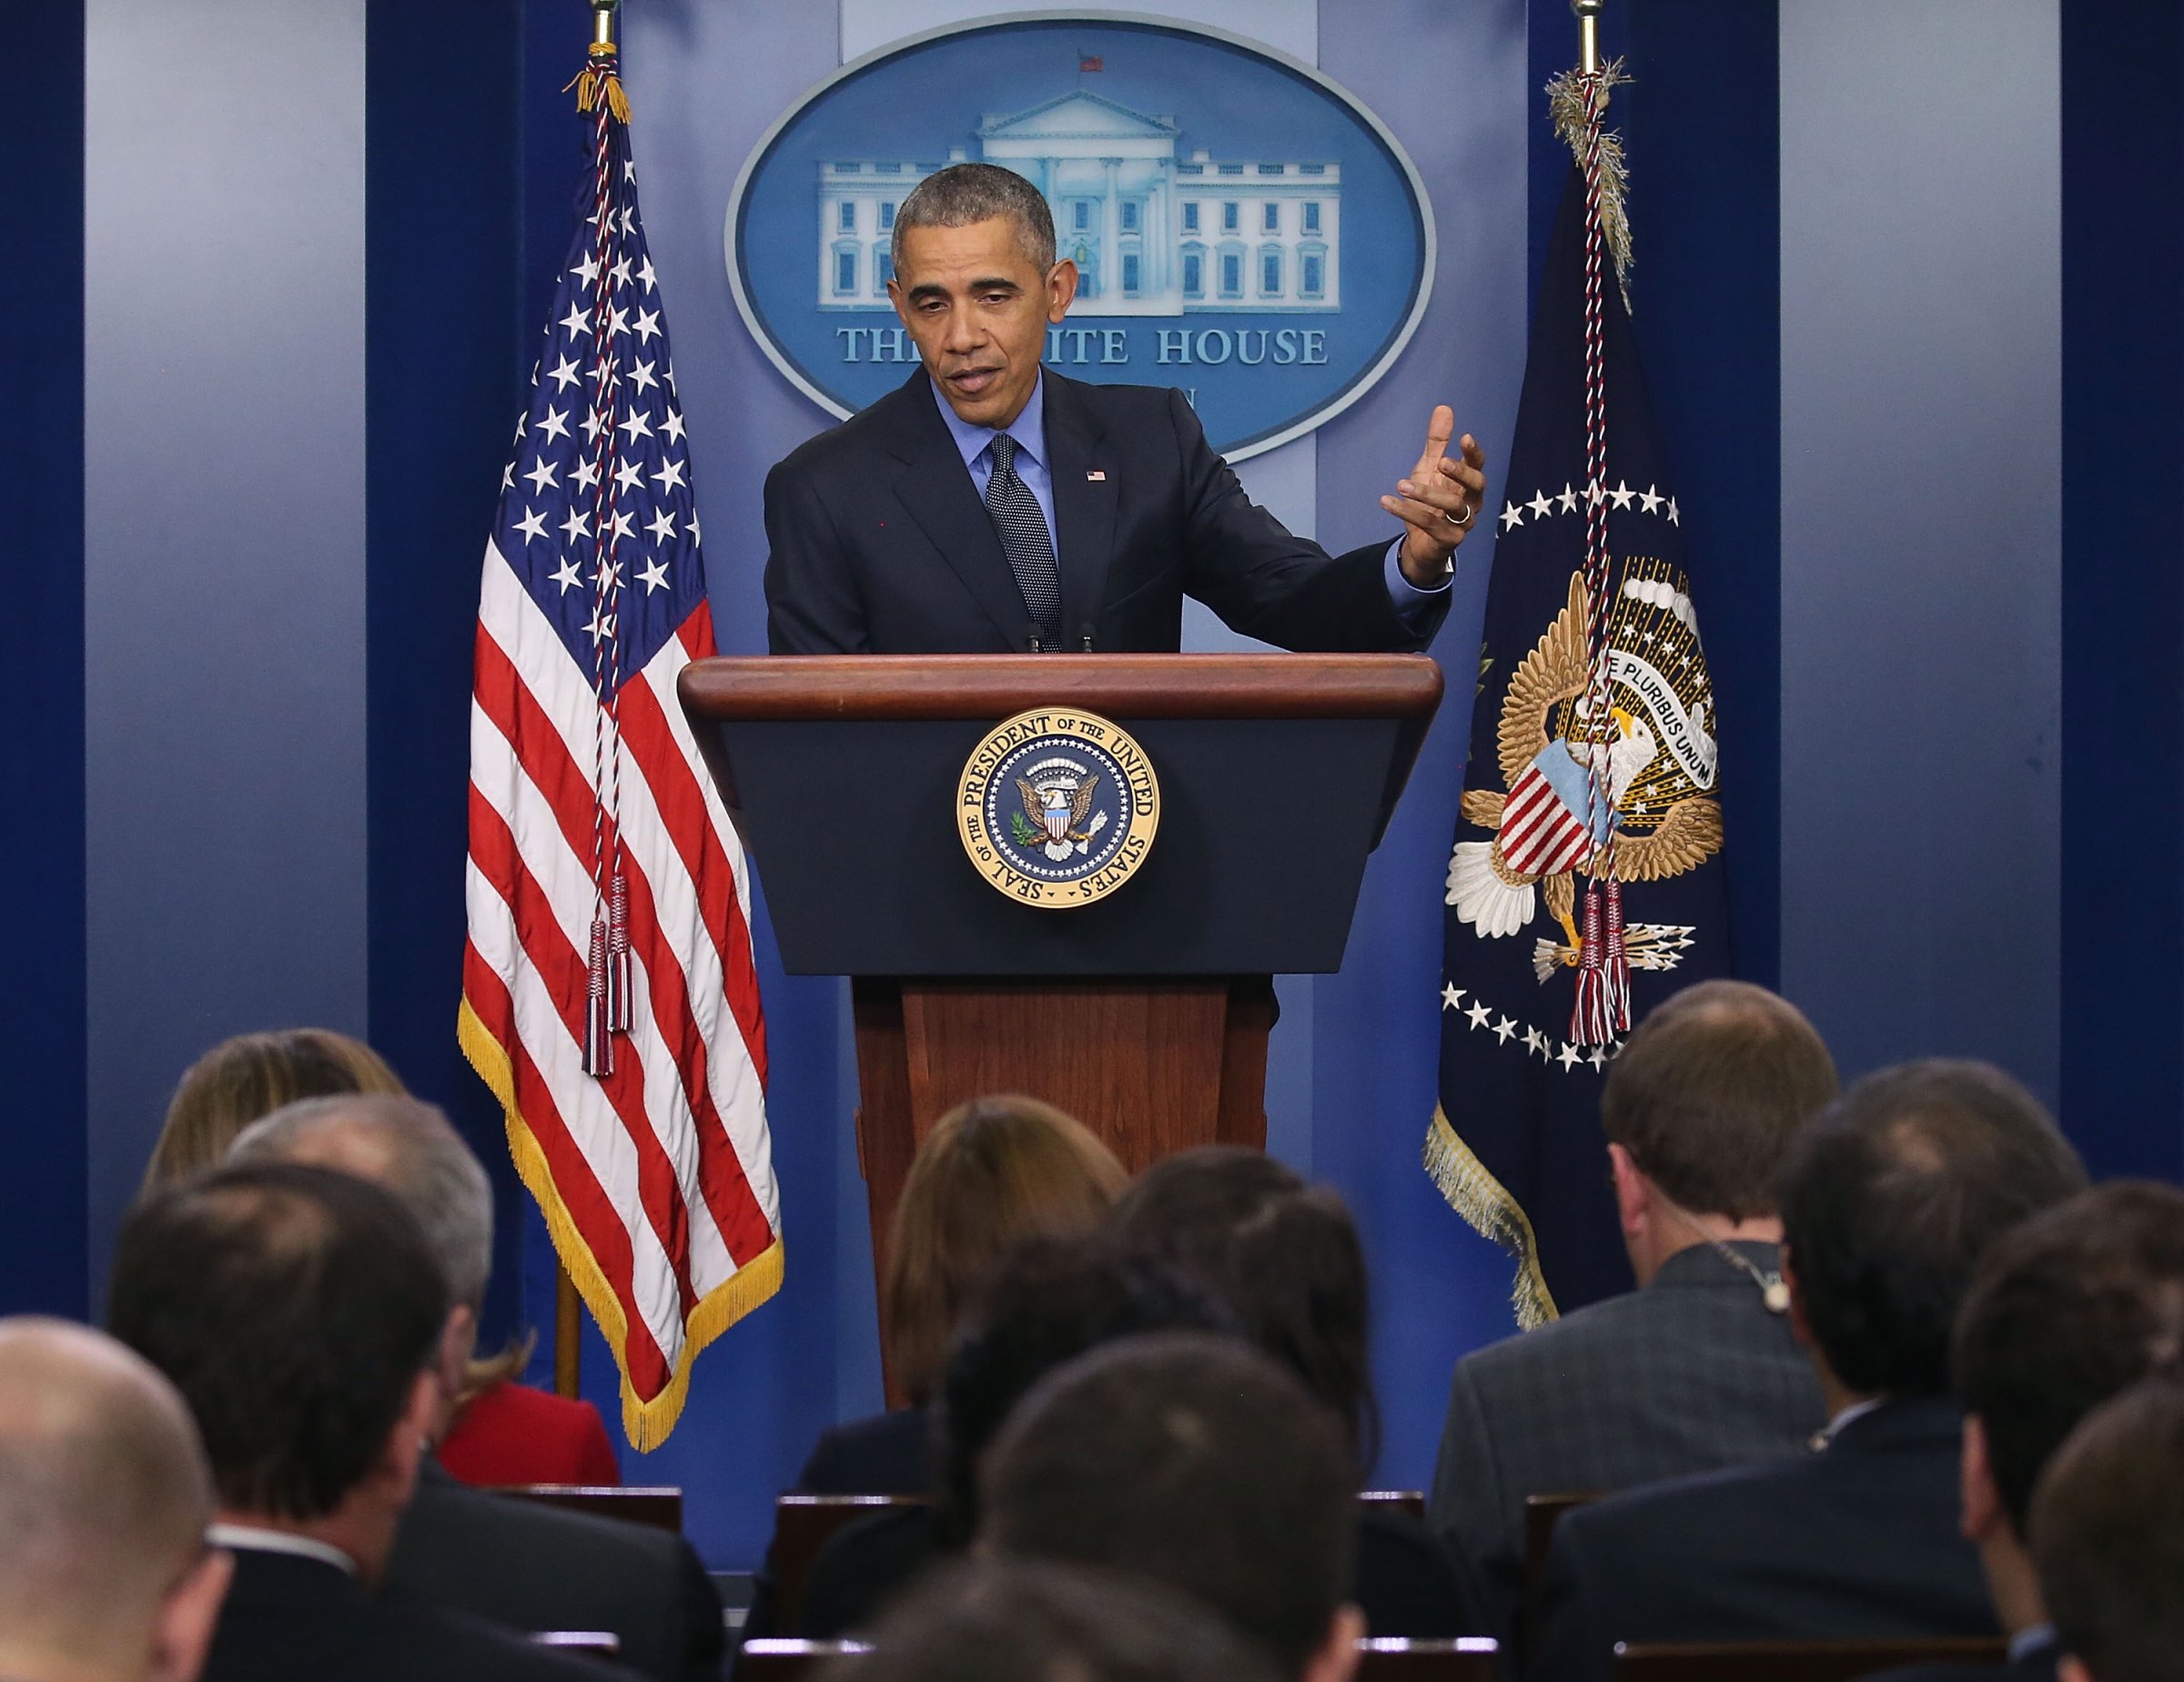 President Obama Holds Press Conference At White House